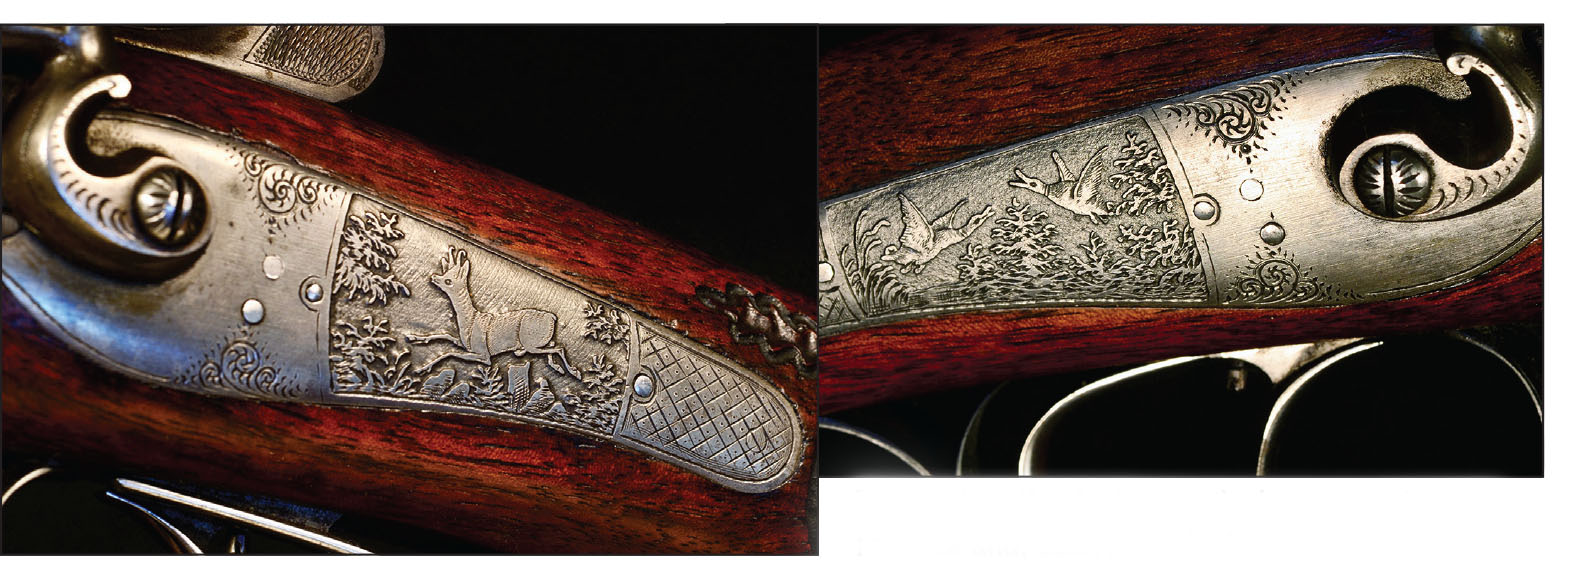 The back-action locks are nicely engraved, with a roebuck and, oddly, two ducks.